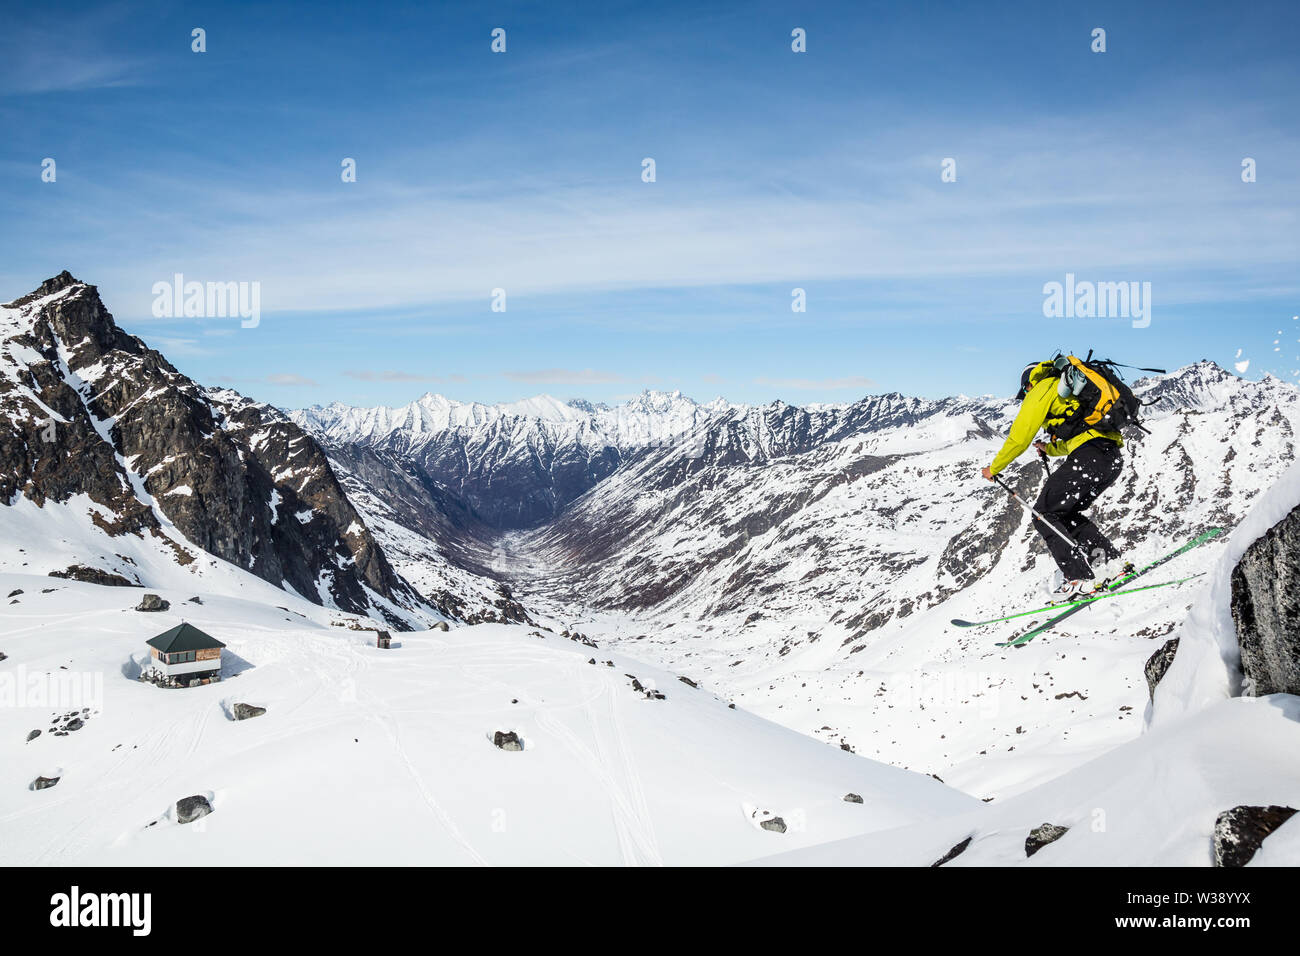 Skier above Snowbird hut and glacier jumping off a large boulder. Behind him is the Bartholf Creek drainage and a large couloir on the distant peak. Stock Photo